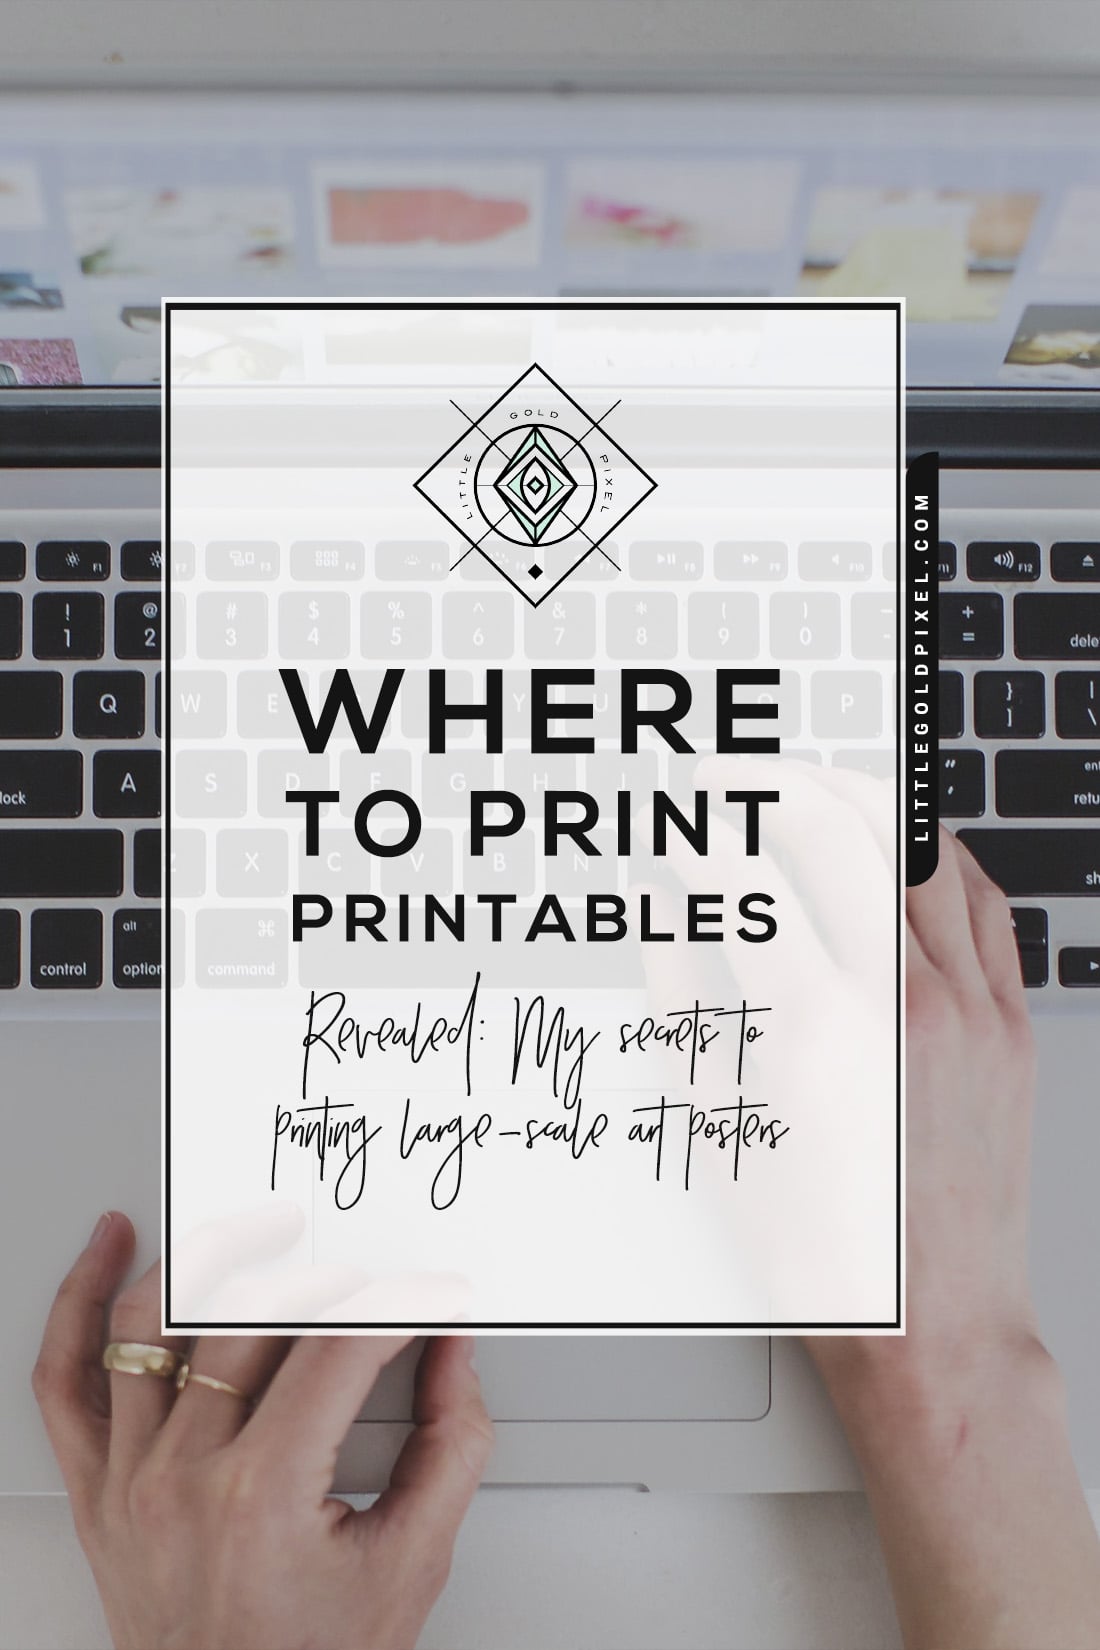 Where to Print Printables (My Top 4 Printing Secrets Revealed for Large-Scale Posters) • Little Gold Pixel